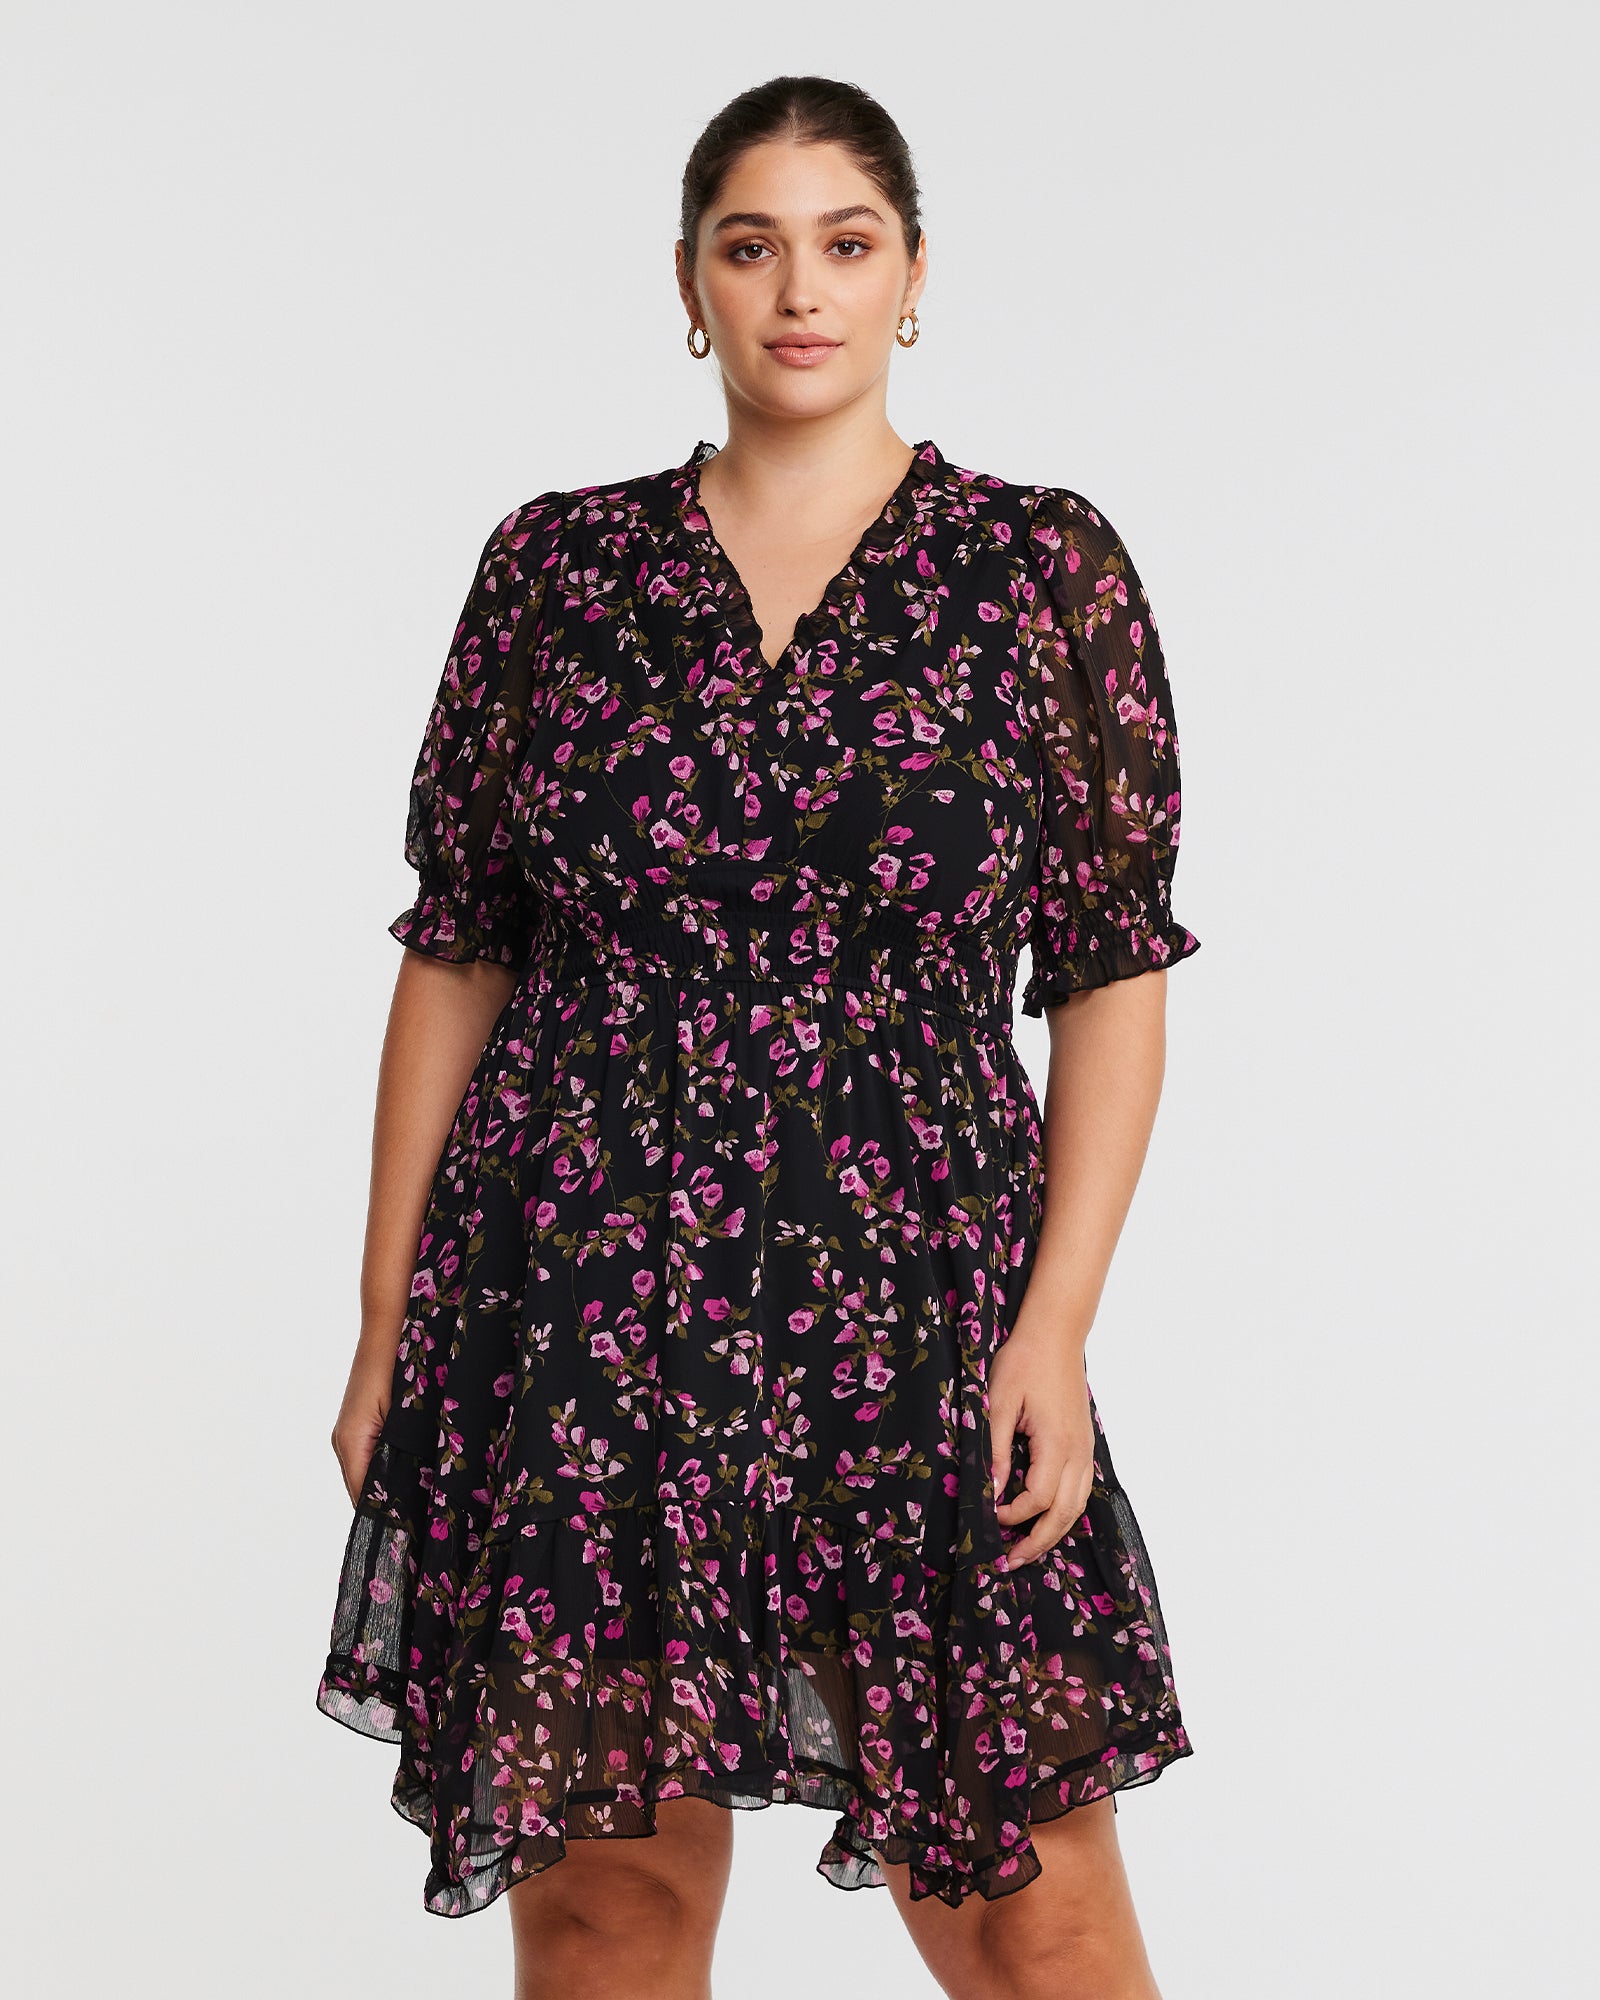 A plus size woman wearing a Tulip Garden Shirred Floral Mini Dress with maintenance instructions.